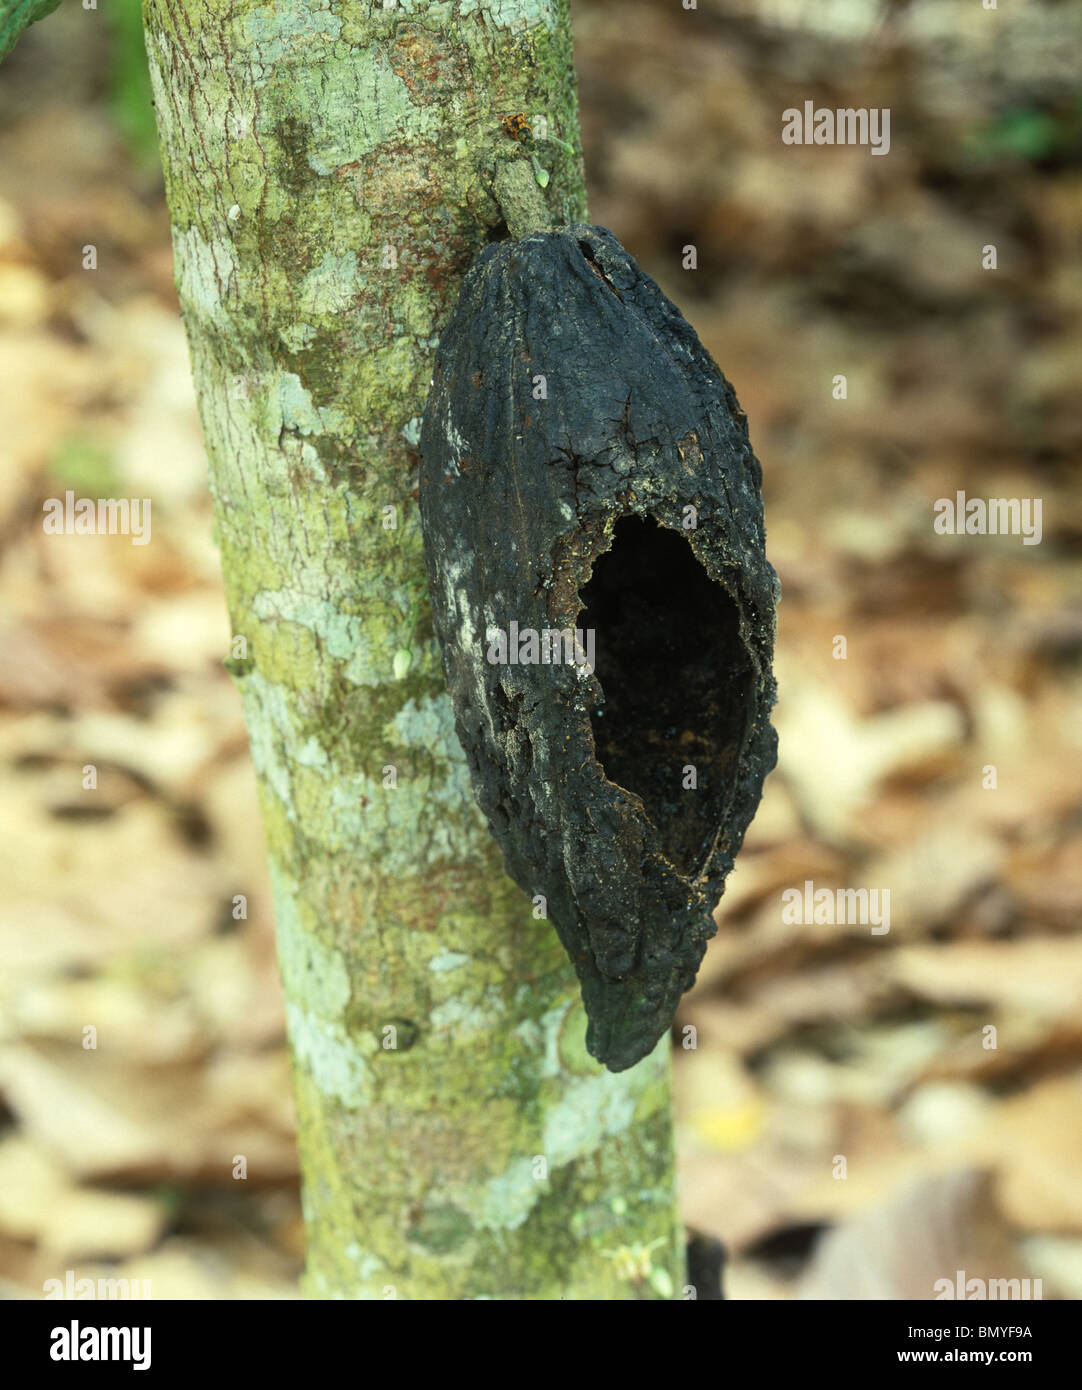 Rat or squirrel rodent damage to a cocoa pod on the bush, Malaysia Stock Photo